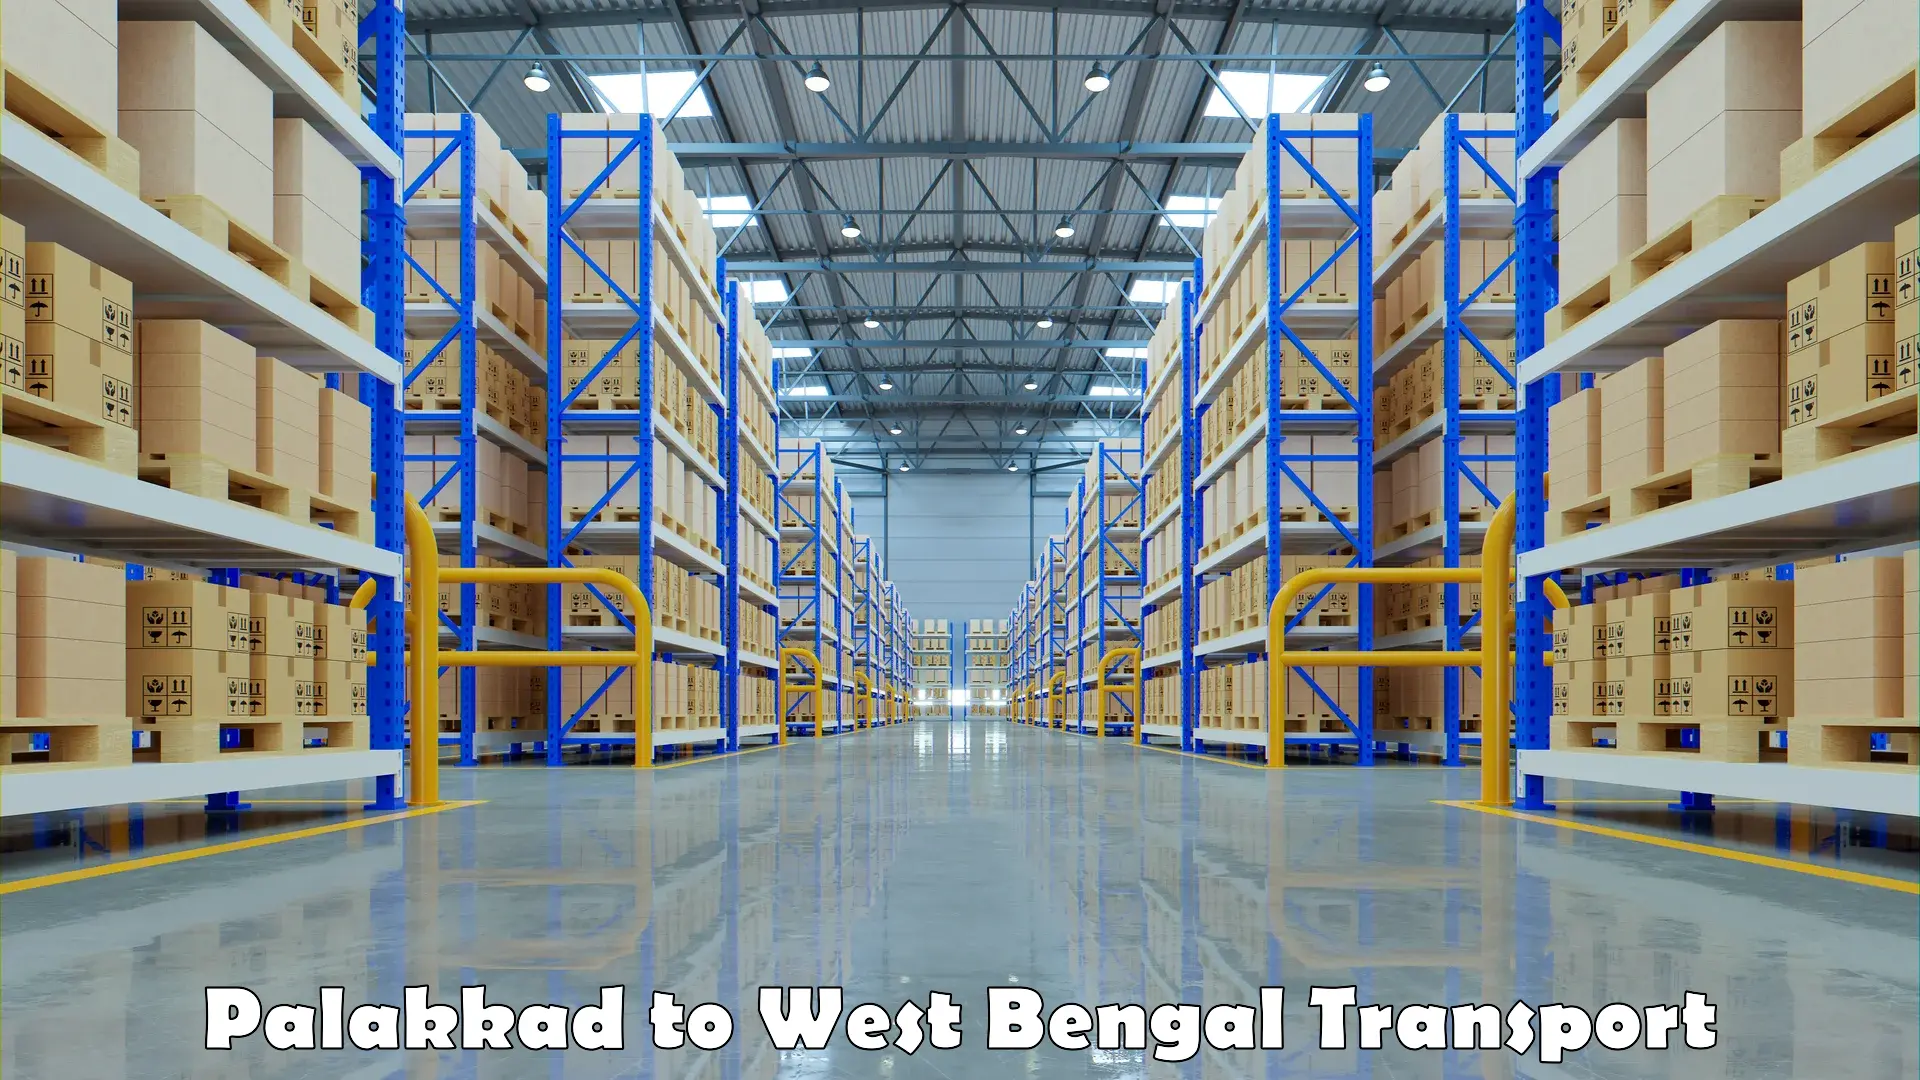 Truck transport companies in India Palakkad to West Bengal